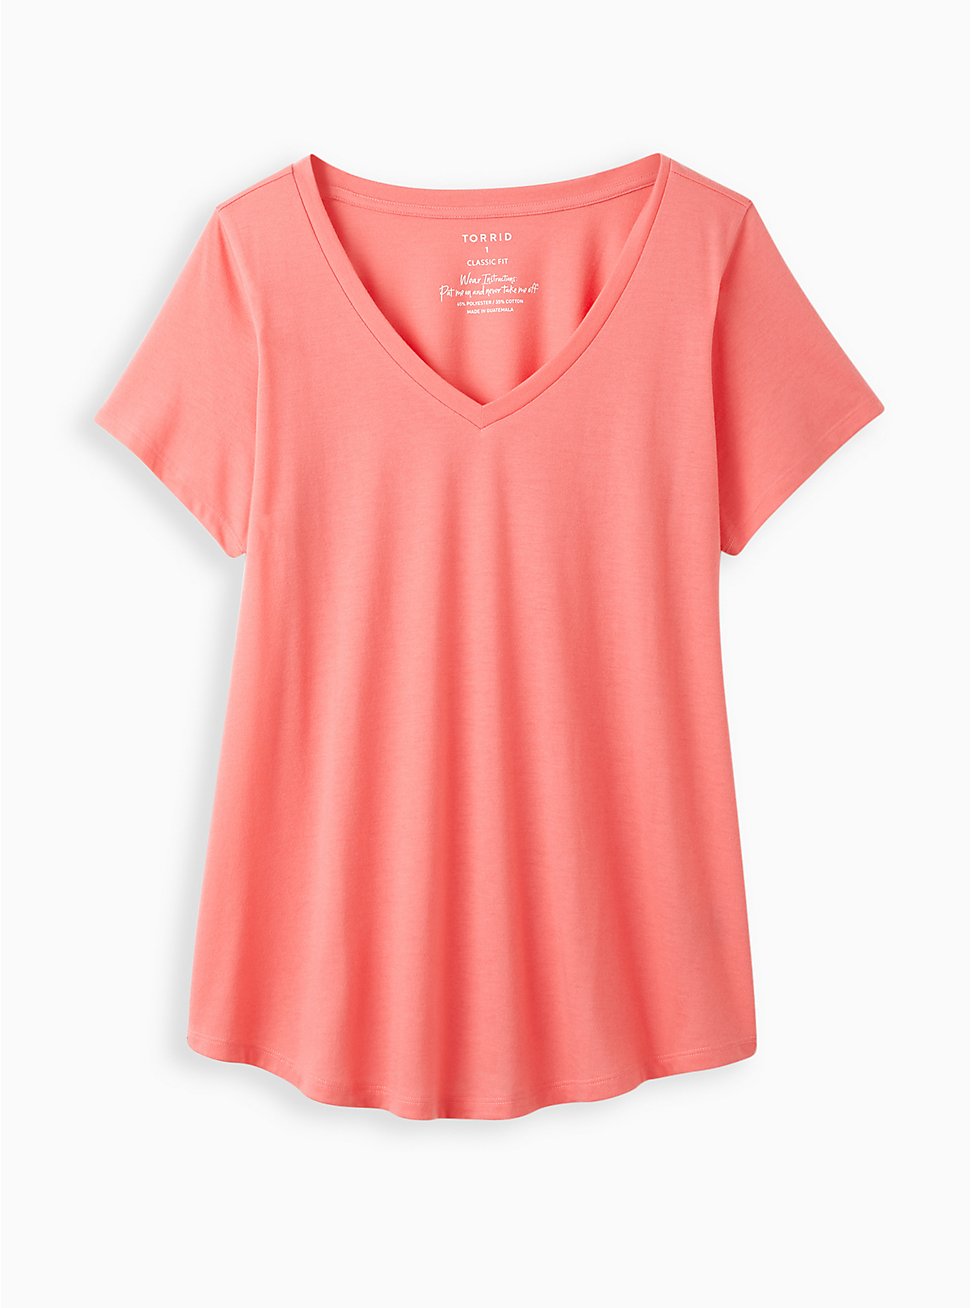 Plus Size Girlfriend Tee - Signature Jersey Coral, CORAL, hi-res